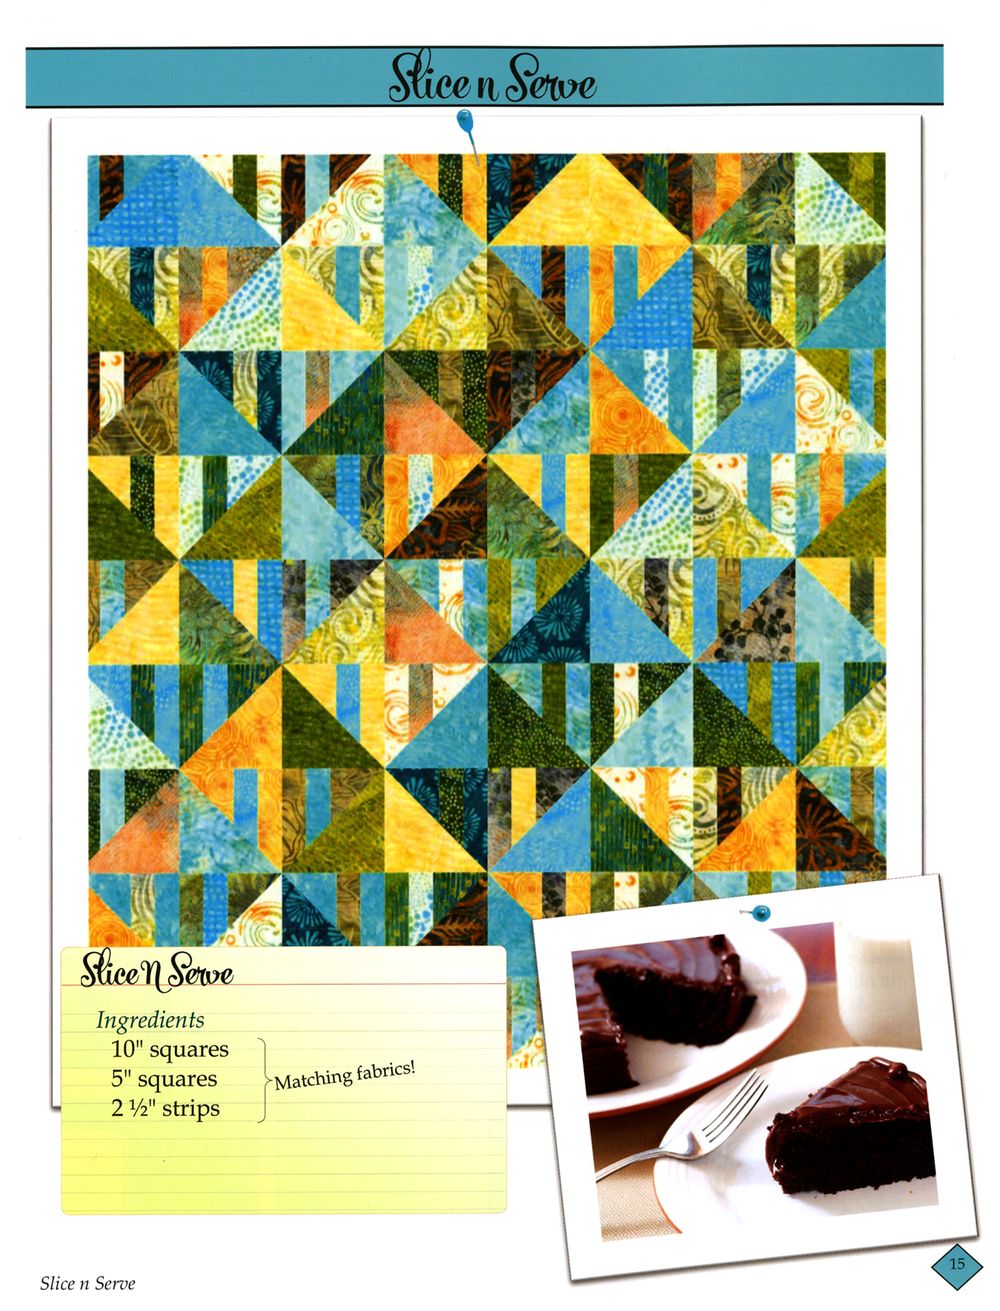 Sweet Tooth Quilt Pattern book by Daniela Stout of Cozy Quilt Designs